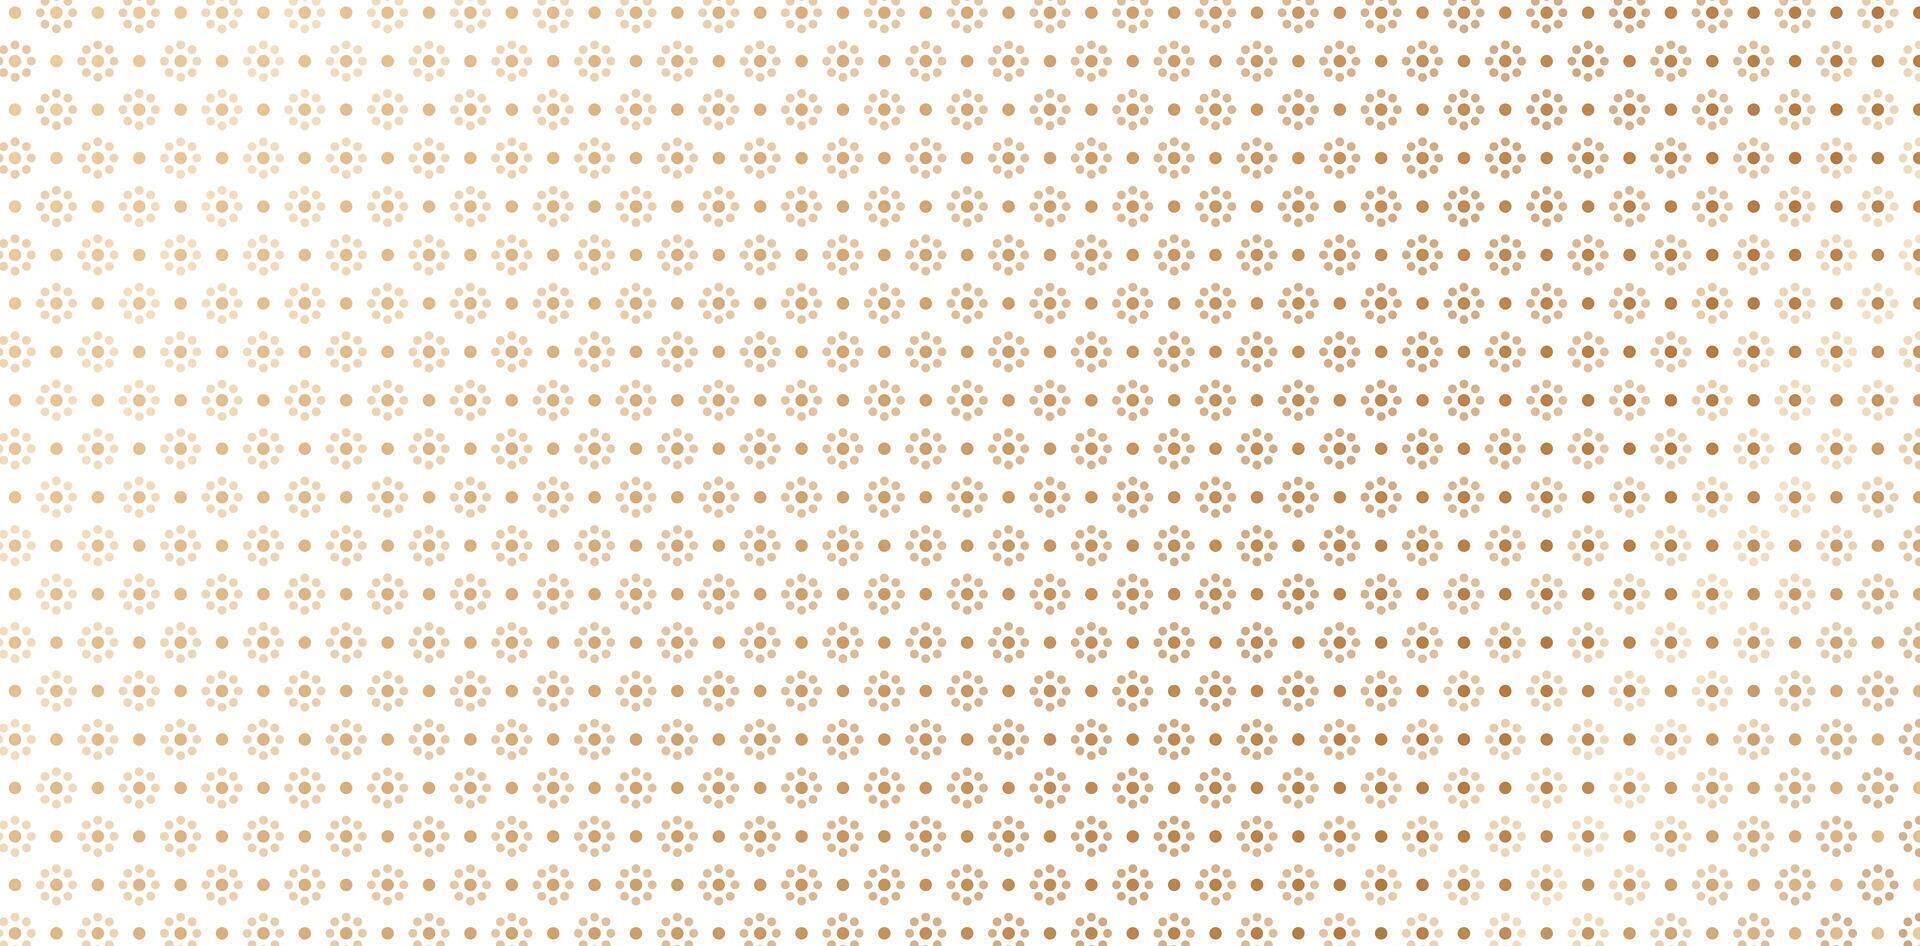 seamless pattern golden dots isolated white backgrounds for fabric, textiles, book cover, wrapping paper, decorative backgrounds, printing creative designs paper material, Fashionable modern wallpaper vector